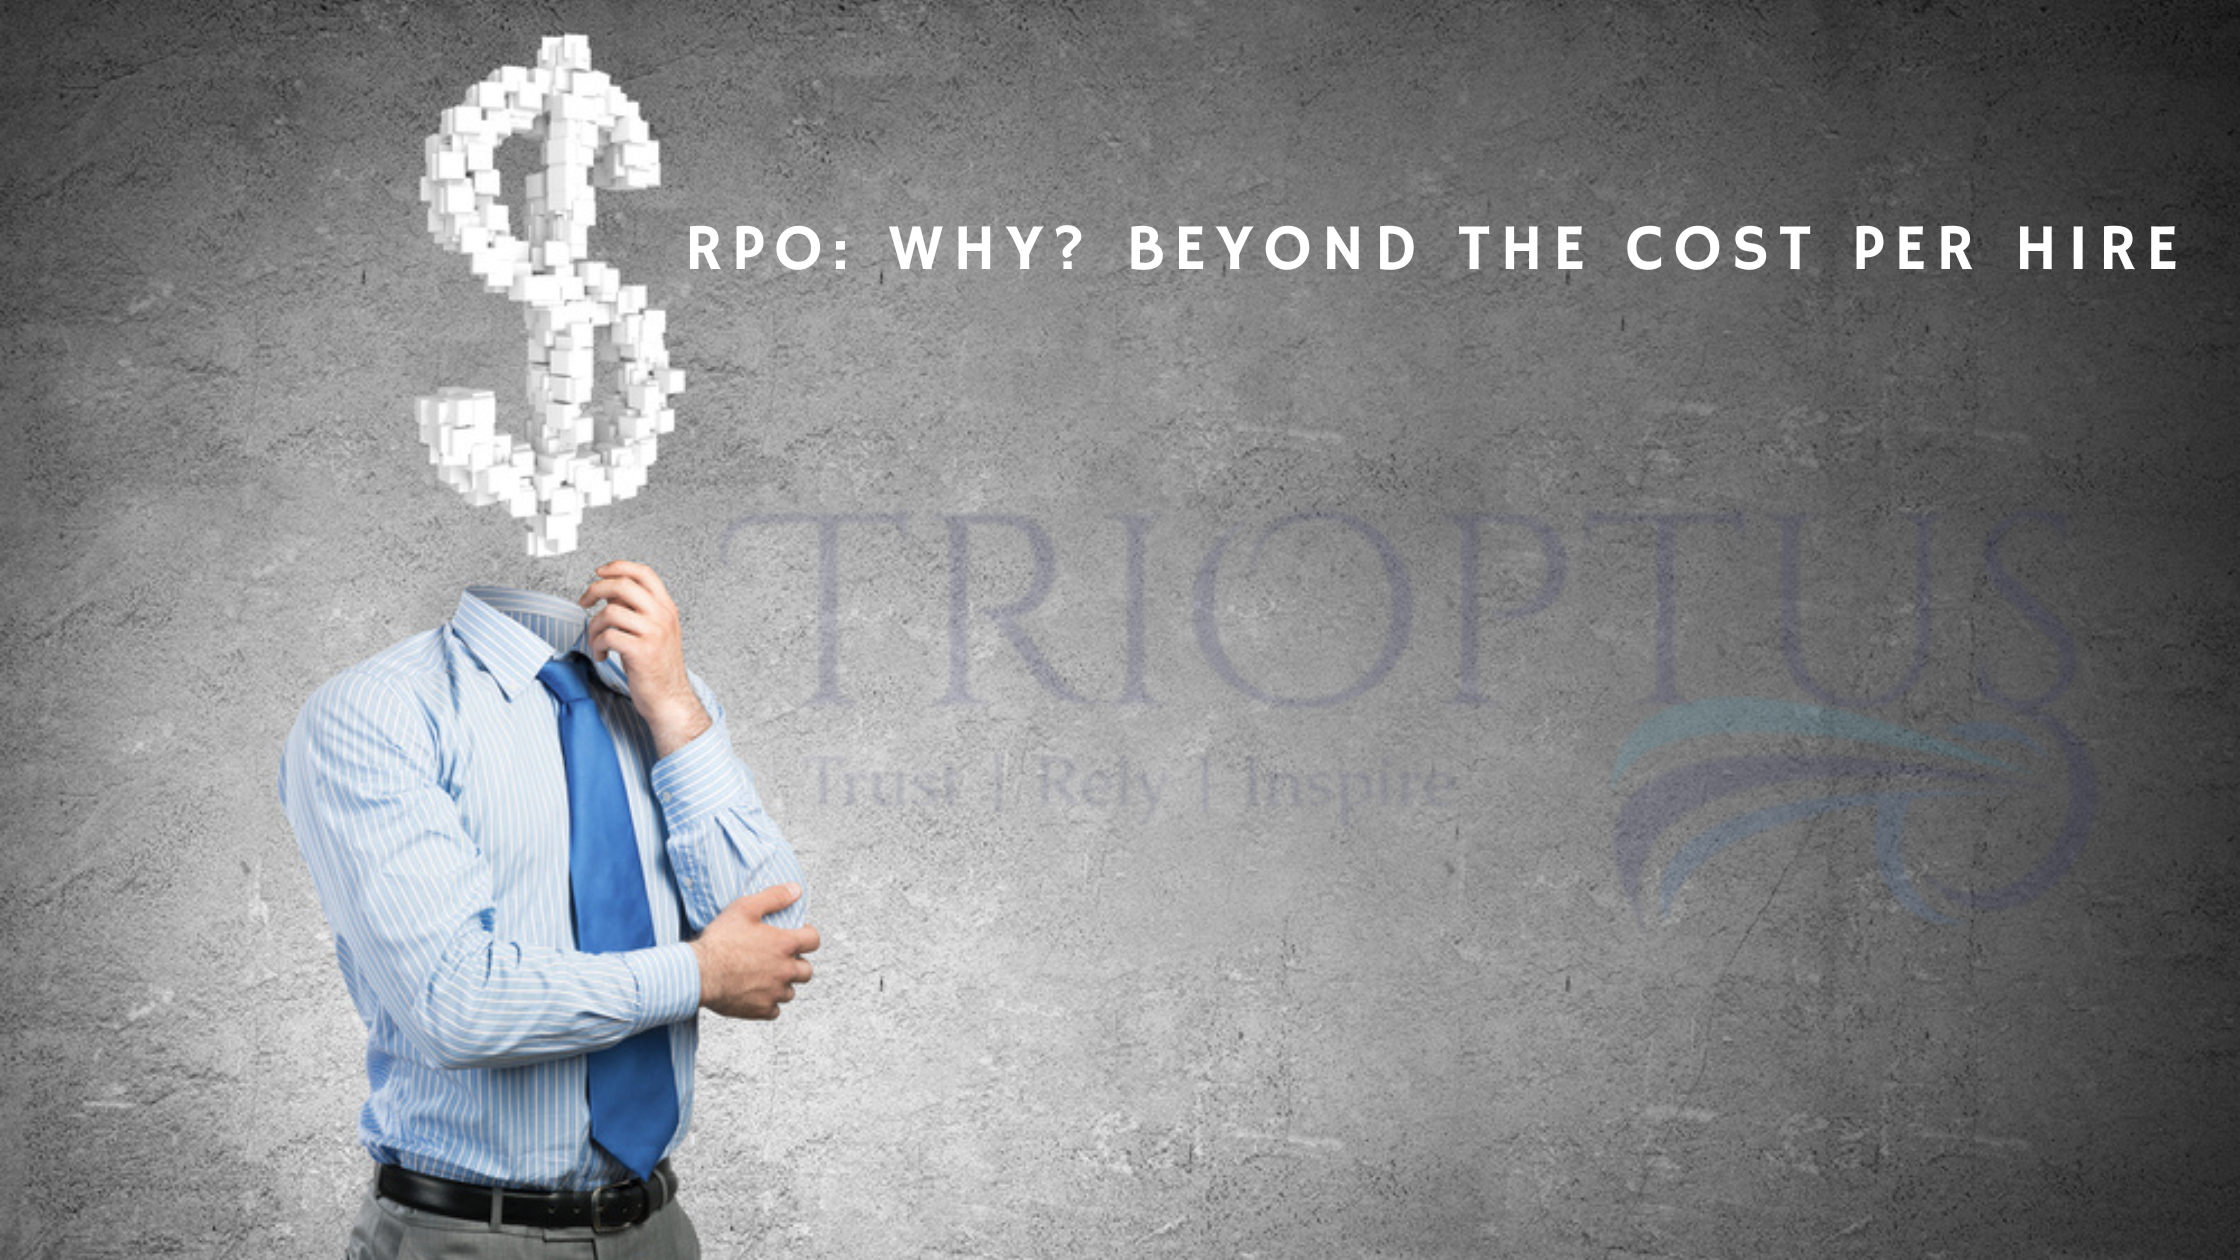 RPO: Why? Beyond the Cost Per Hire - RPO Services